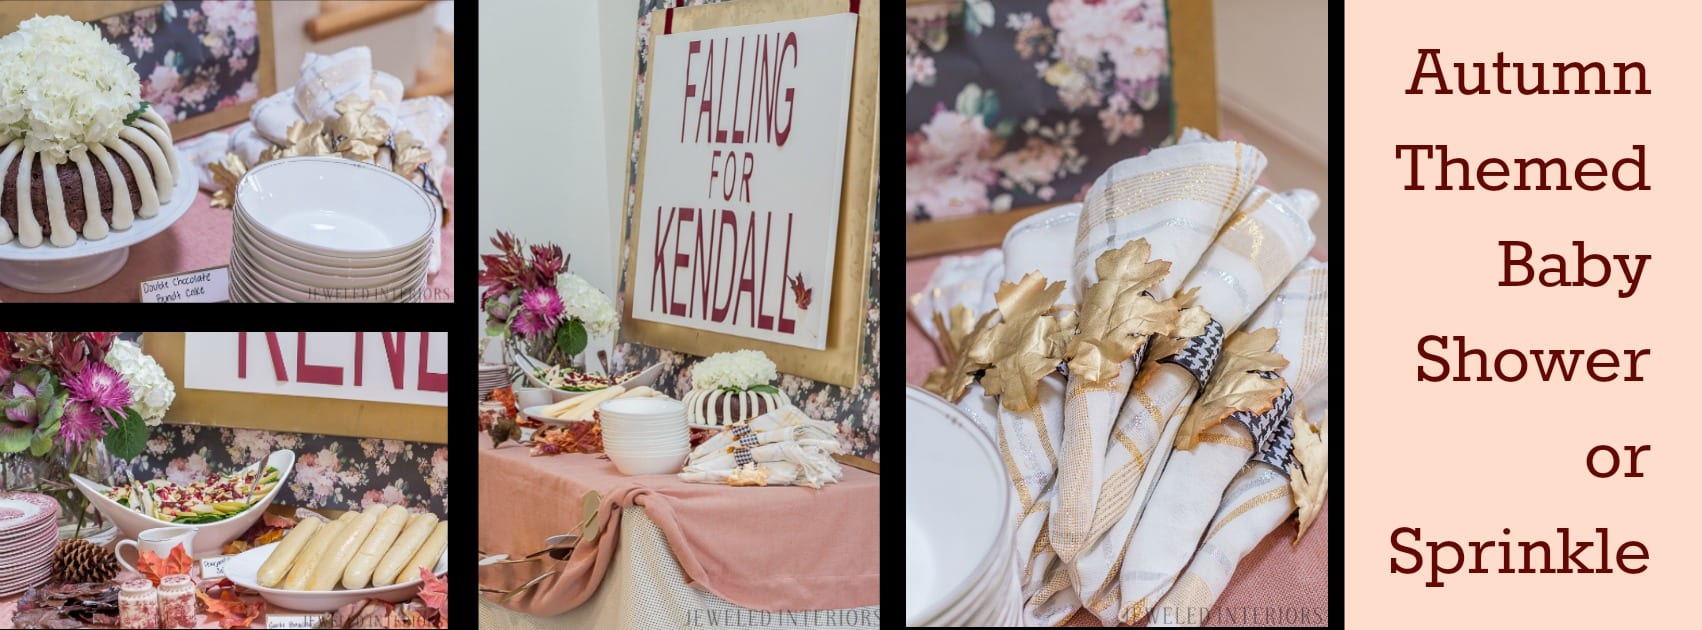  You have got to check out this baby shower!  Autumn, fall, theme, themed, sprinkle, baby, shower, buffet, girl, recipes, decorations, moody, florals, blush, burgundy, moody, floral, leaves